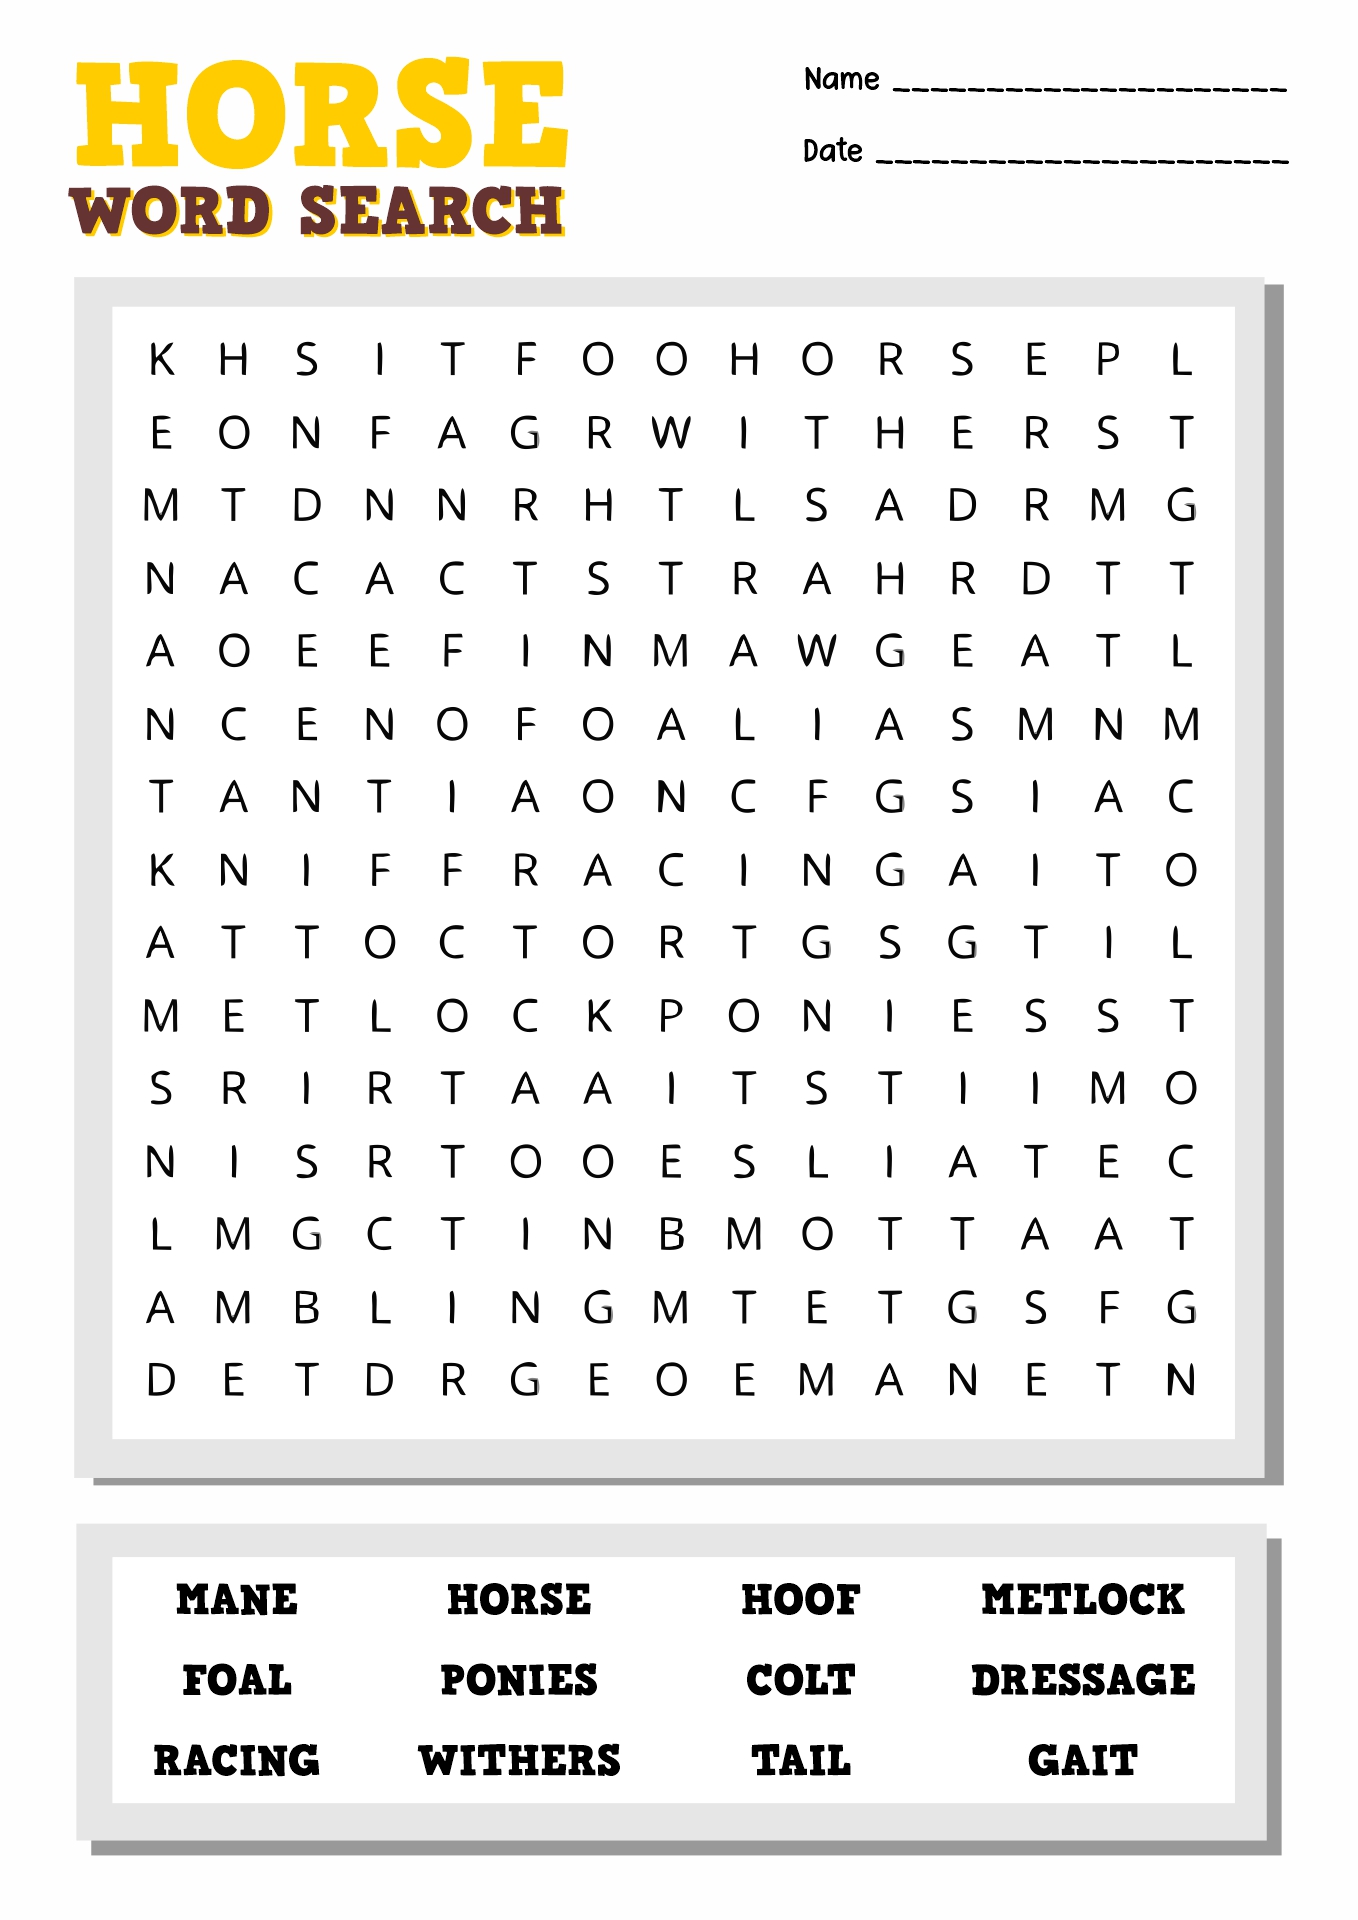 Horse Word Search Printable Image